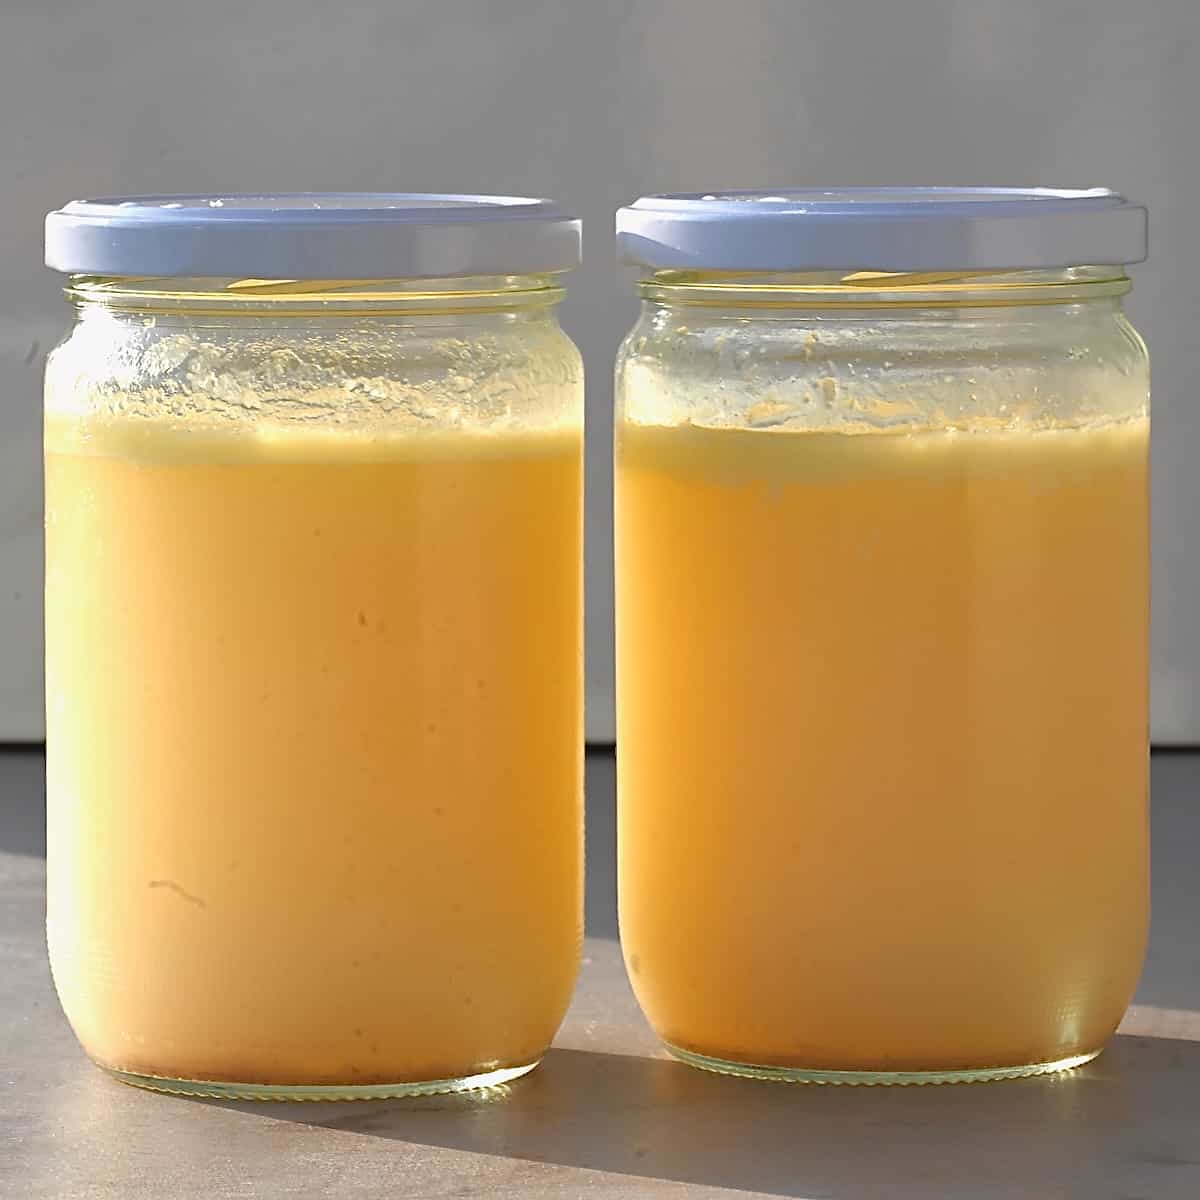 Two jars with homemade chicken stock